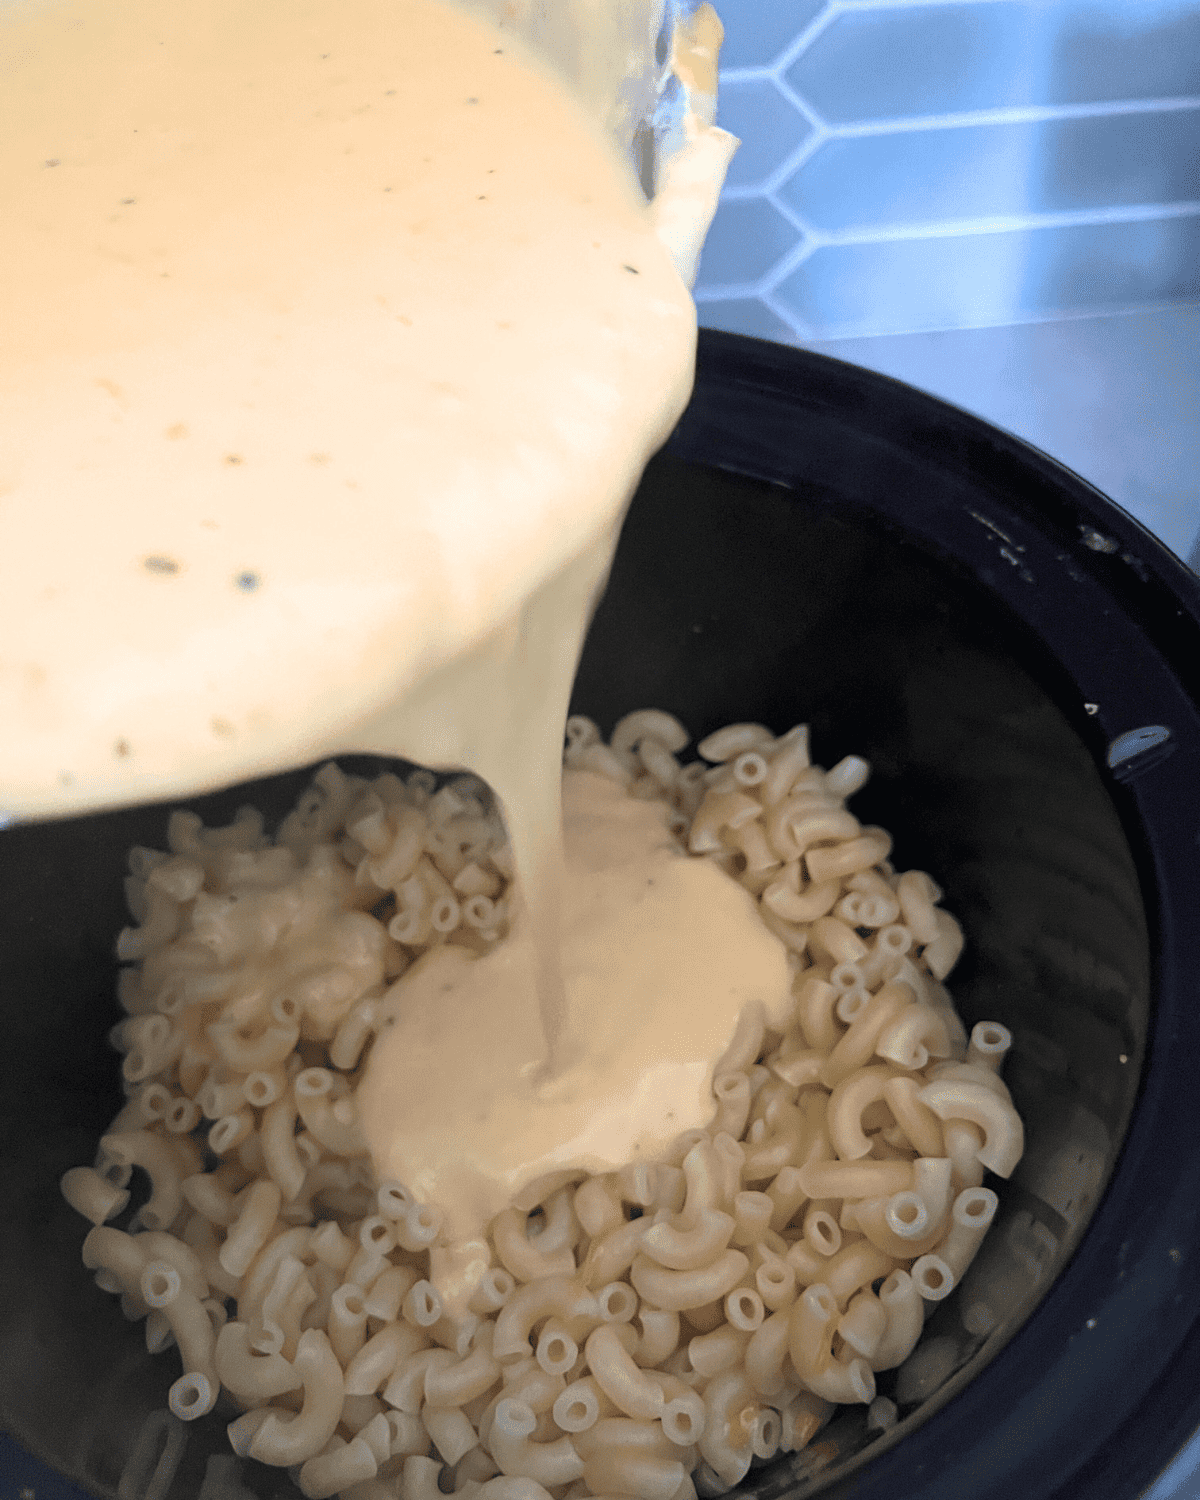 cheese sauce being poured into slow cooker over noodles.